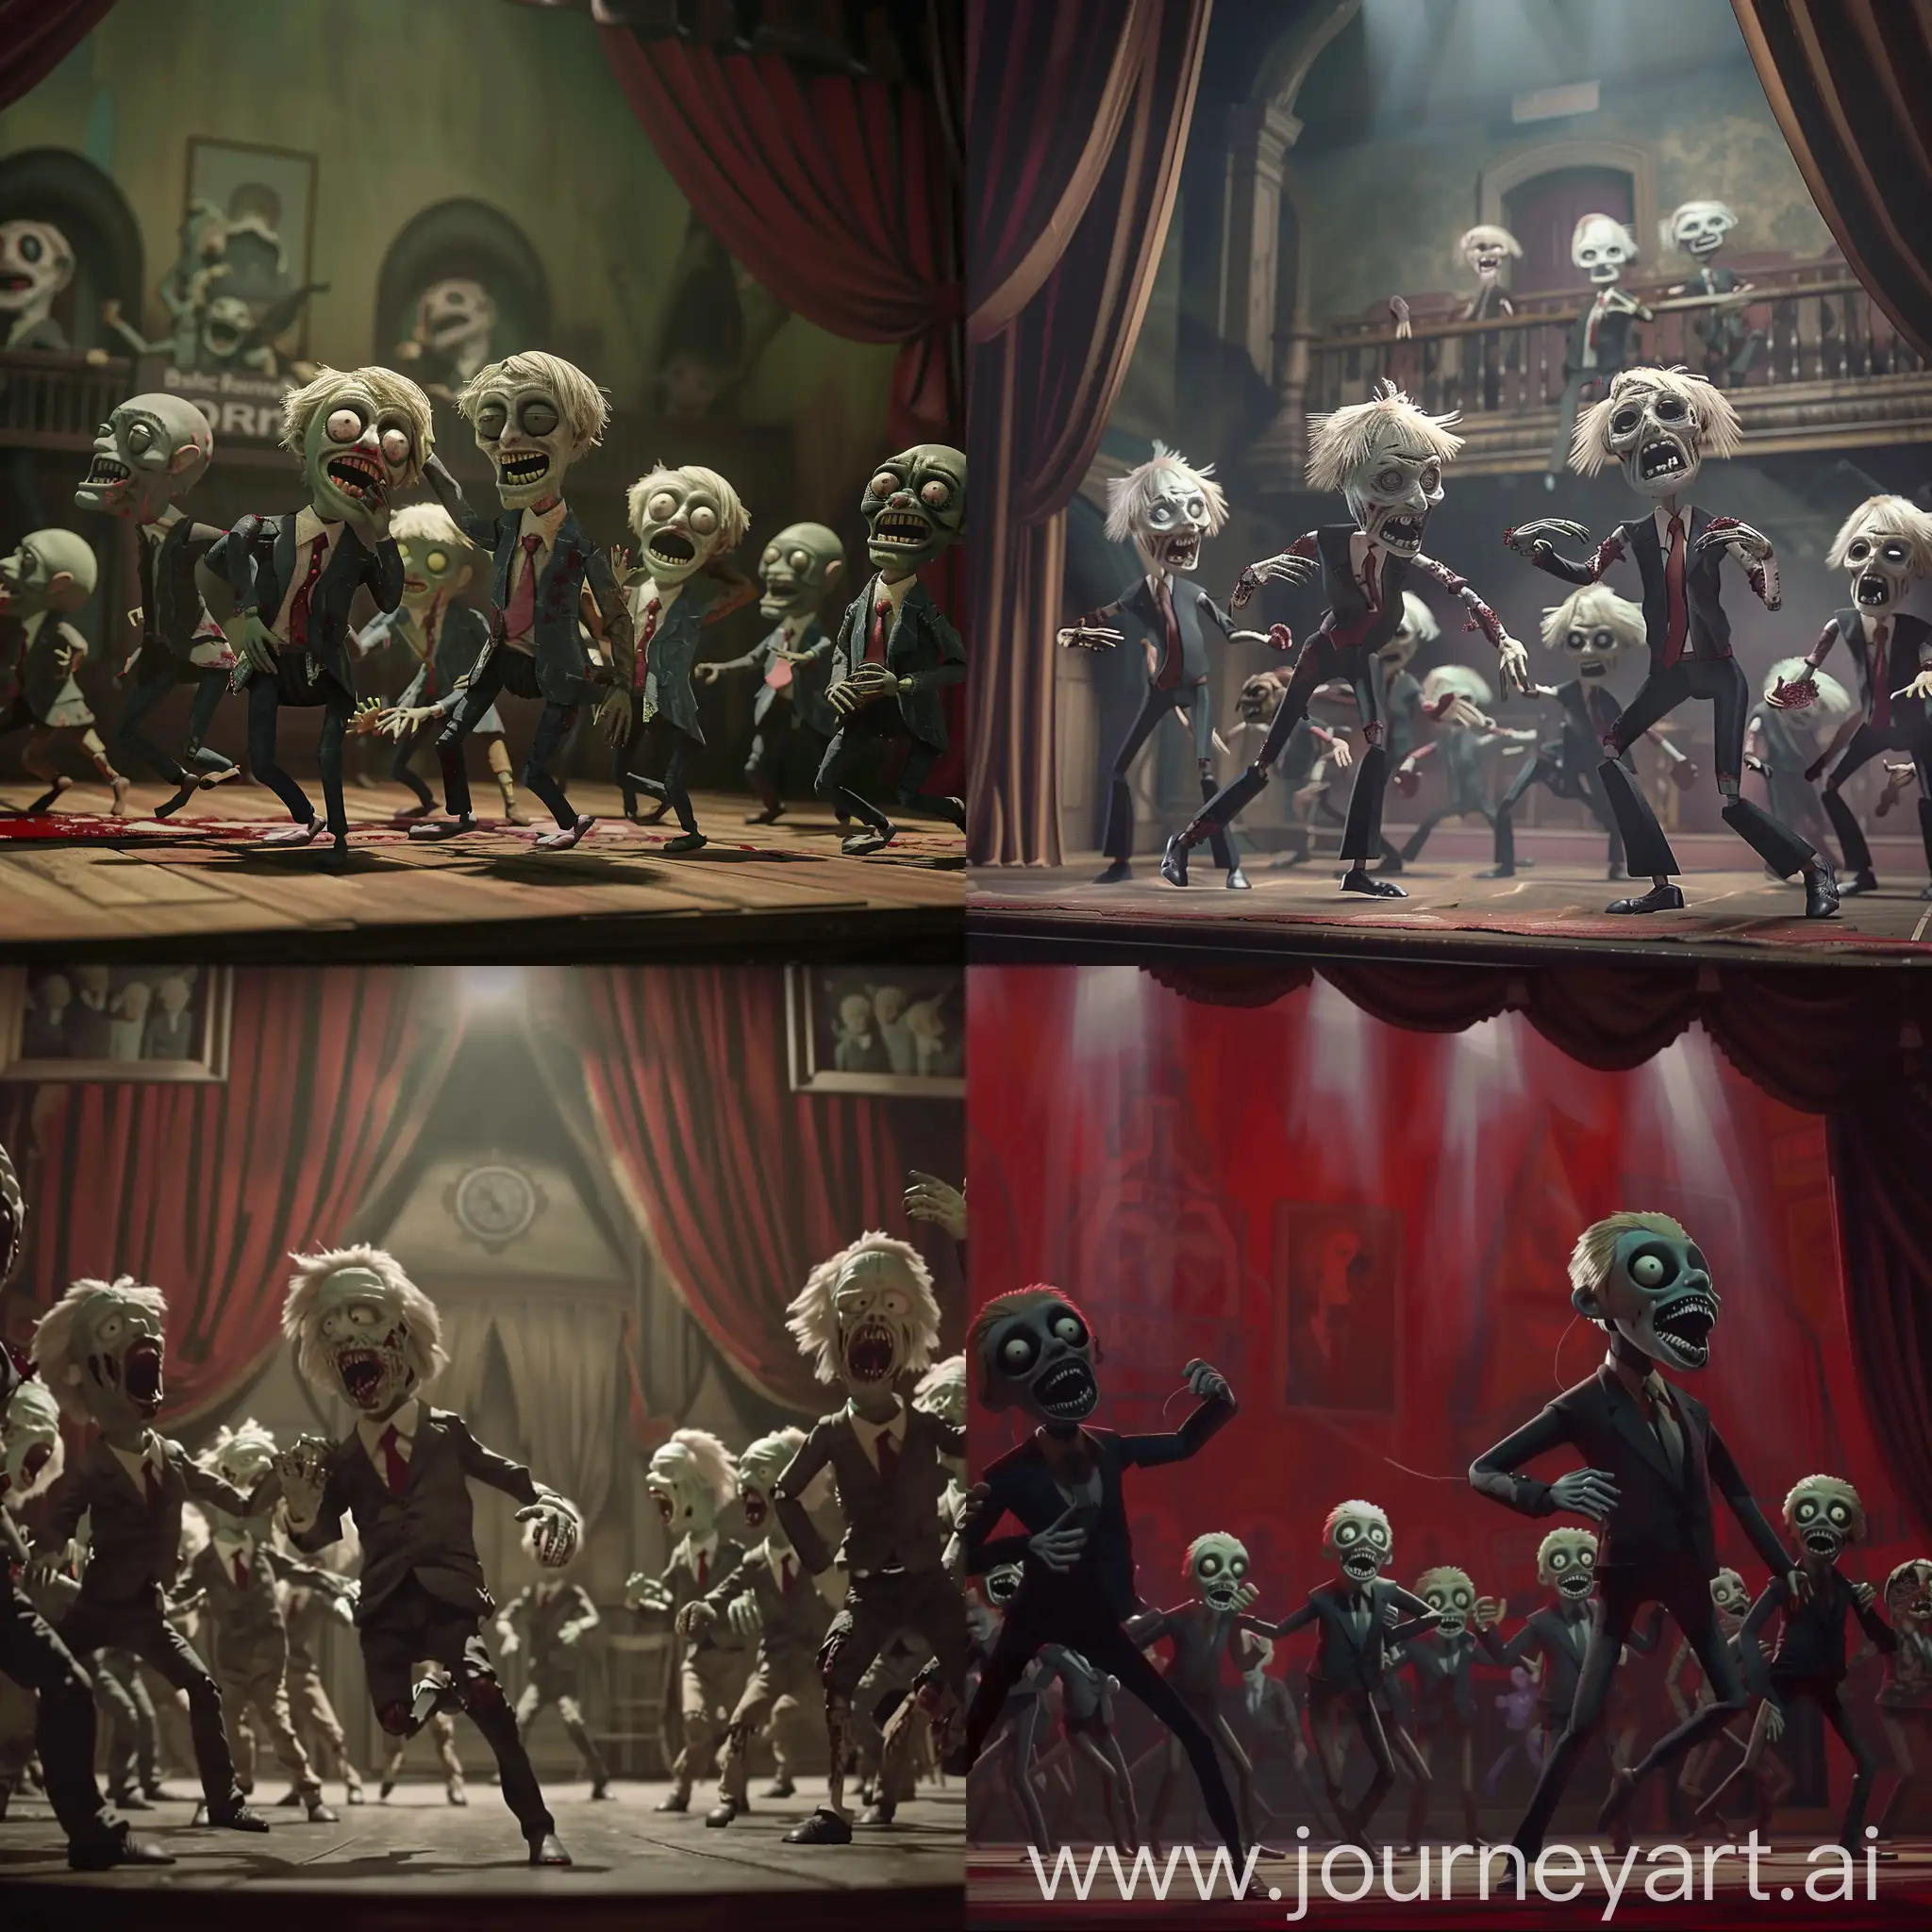 Creepy-Puppet-Theatre-Stage-with-Boris-Johnson-Zombies-Dancing